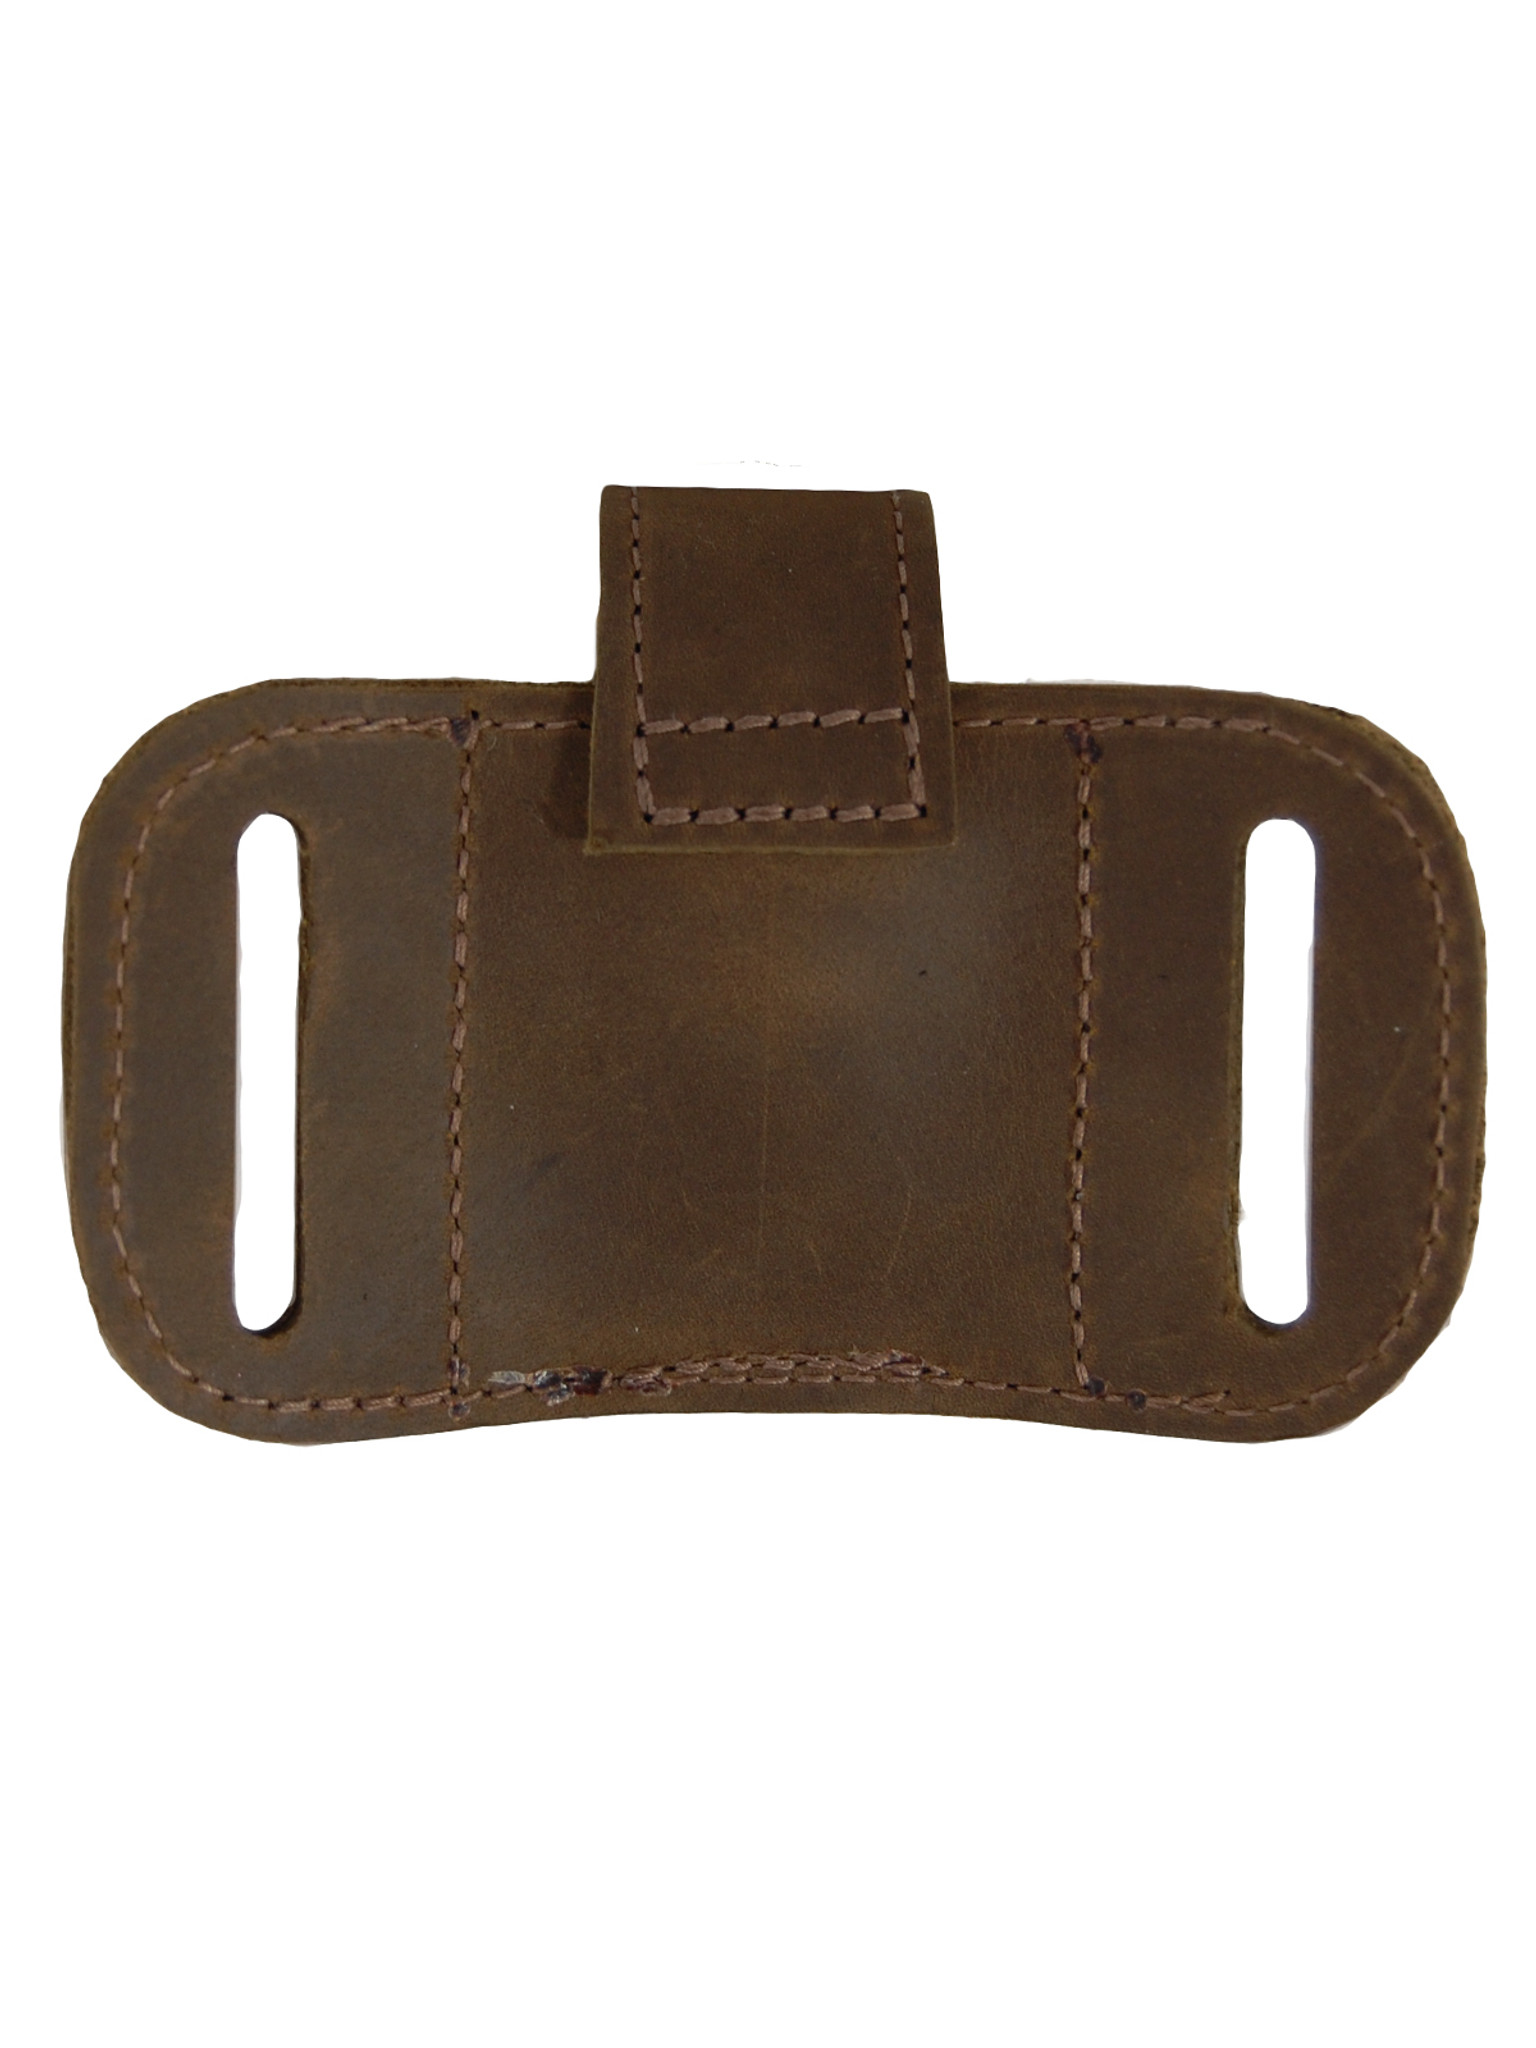 Barsony Brown Leather Revolver Speed Loader Pouch for 5-6 Shot .38